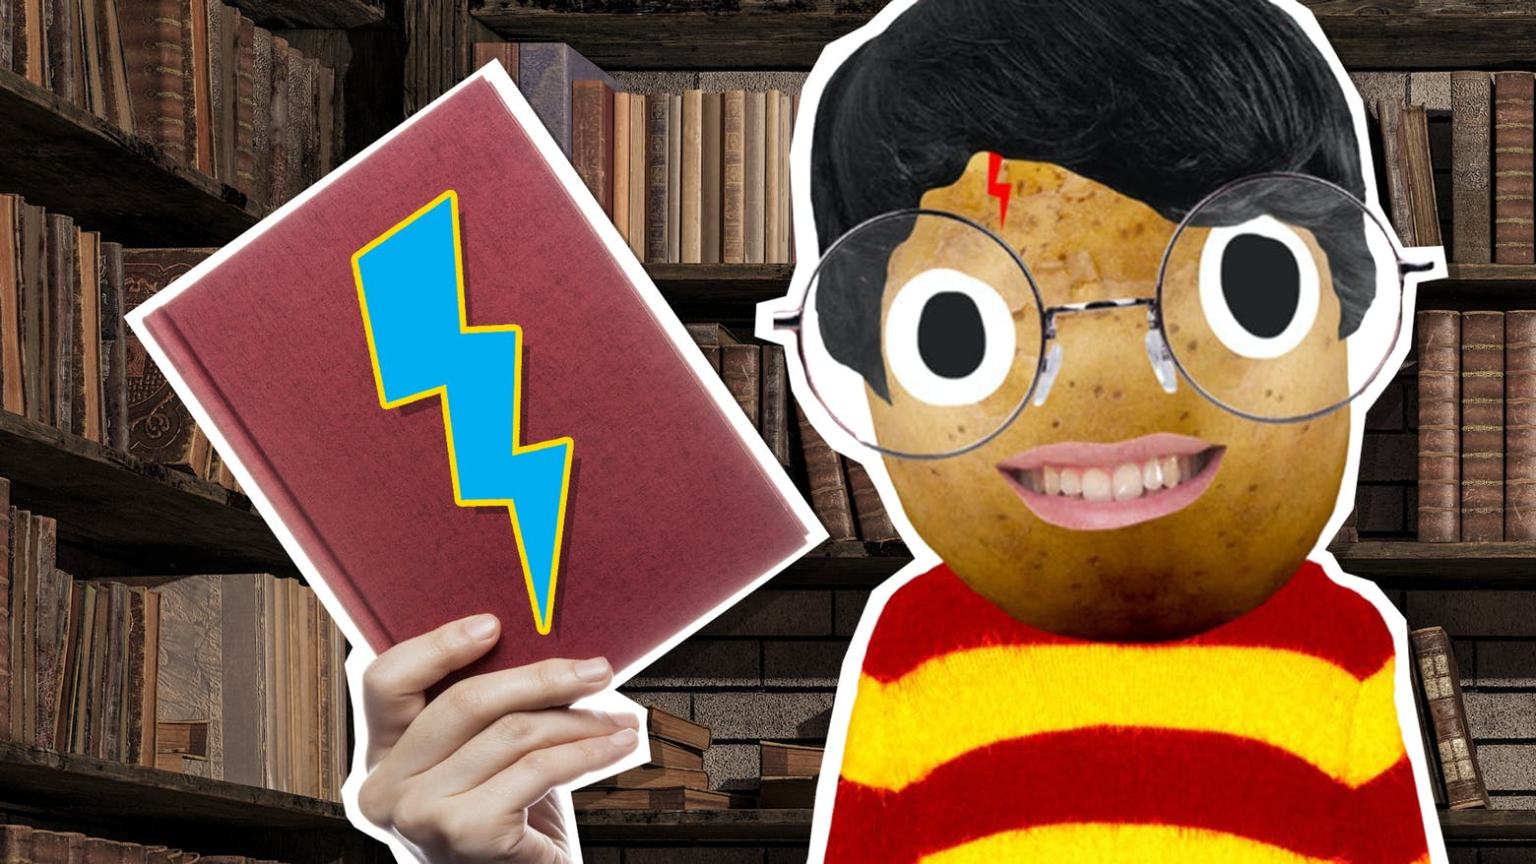 Harry Potter holding a spell book